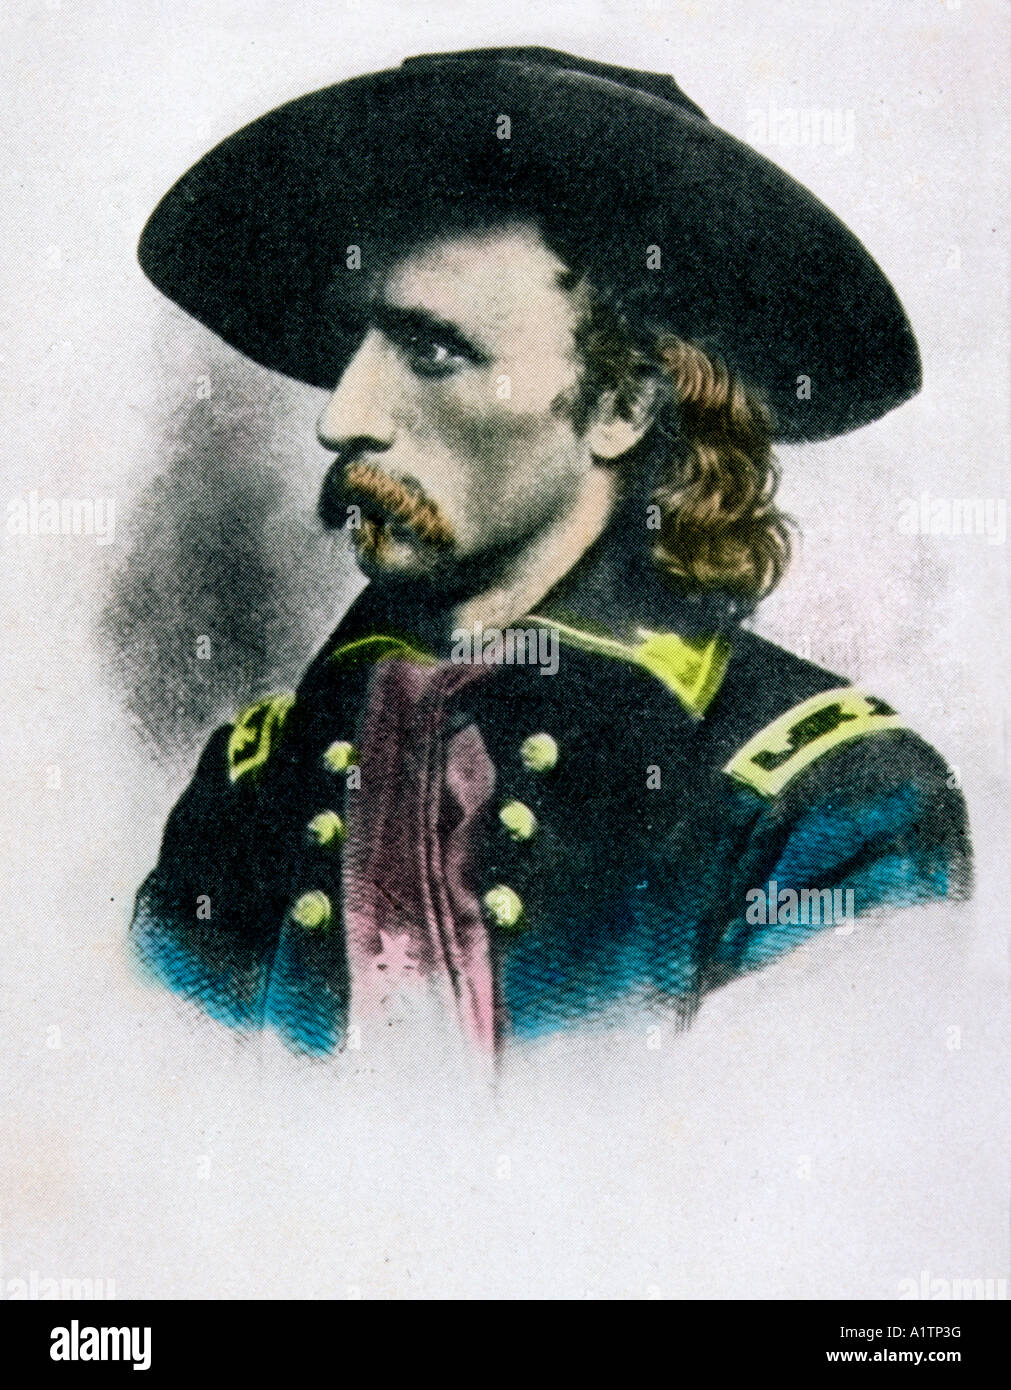 George Armstrong Custer, 1839 - 1876.  United States Army officer and cavalry commander. Stock Photo